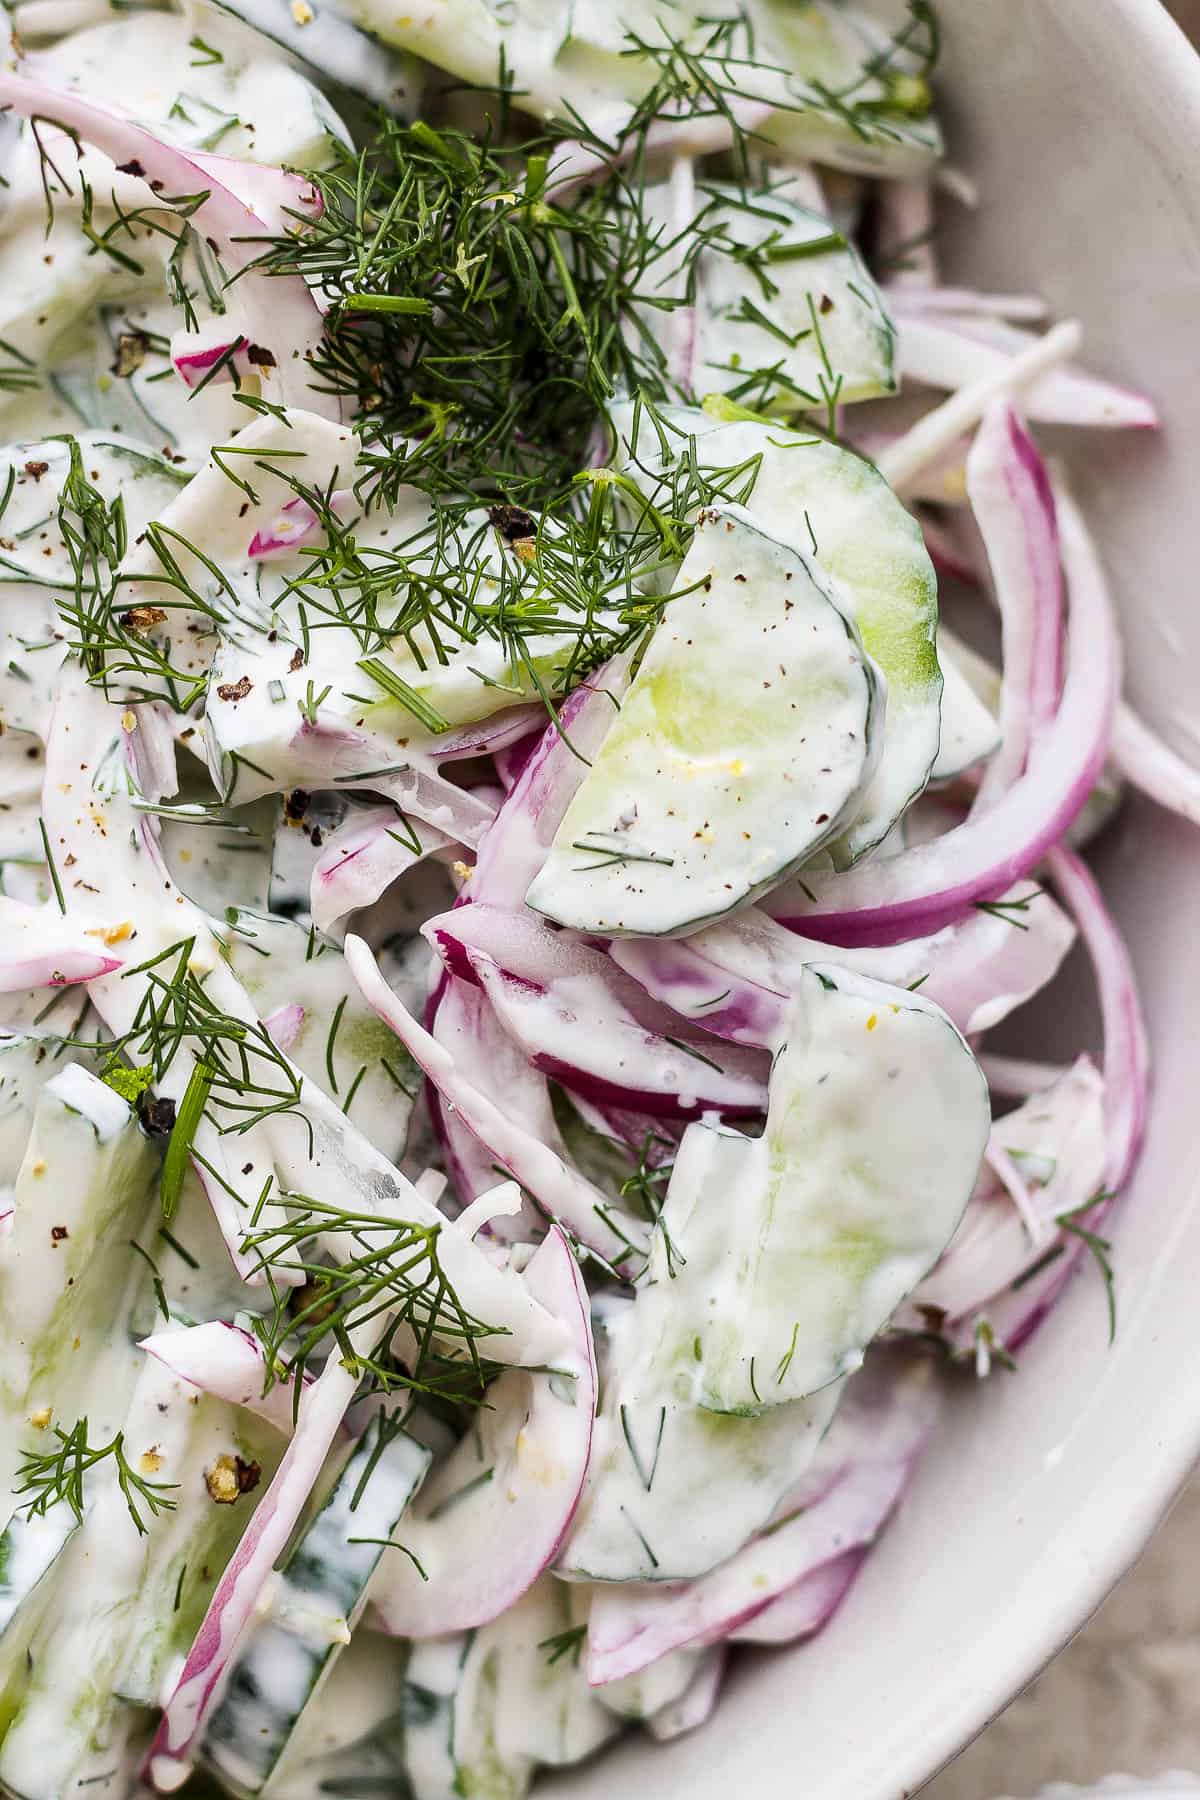 A close up of the creamy cucumber salad in the bowl topped with freshly chopped dill.